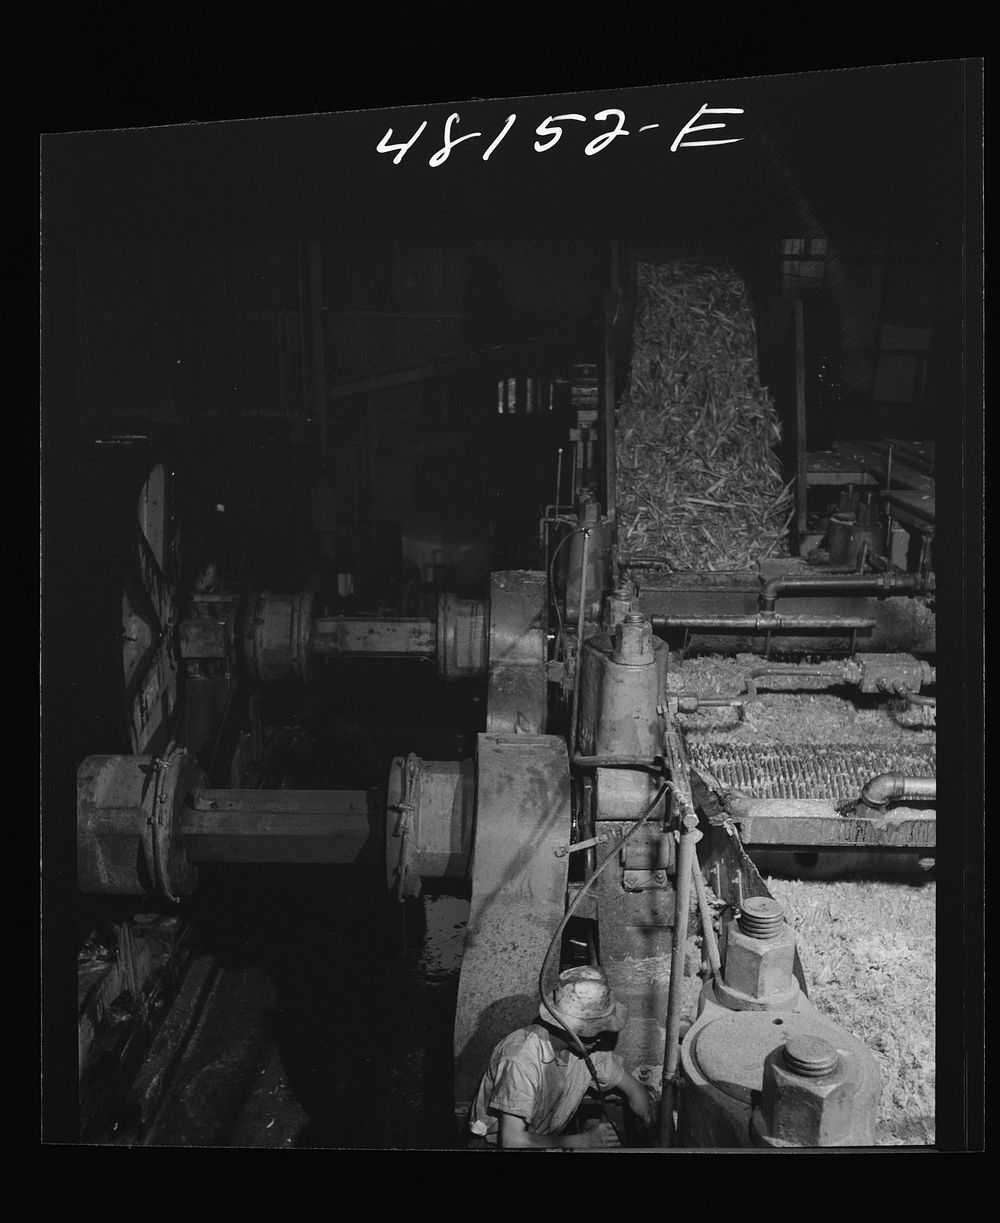 [Untitled photo, possibly related to: San Sebastian, Puerto Rico (vicinity). Small grinding mill at a "central"]. Sourced…